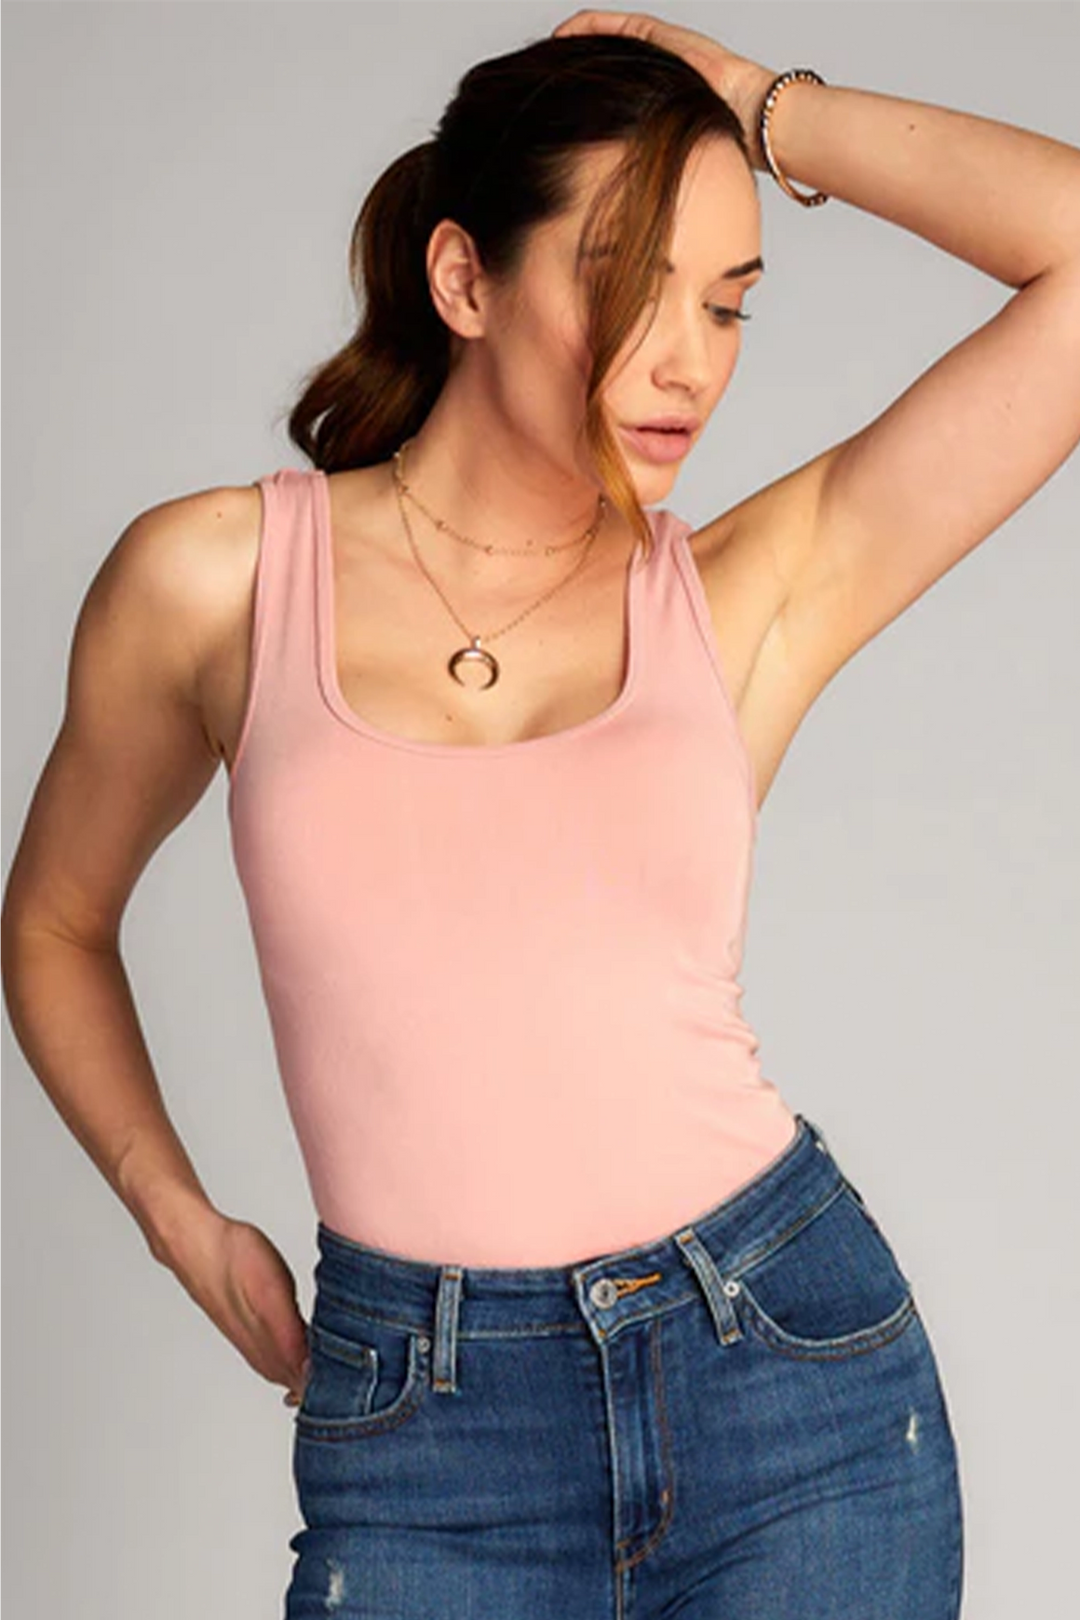 Stretchy and comfortable, it is perfect for activewear, outerwear or just lounging around!